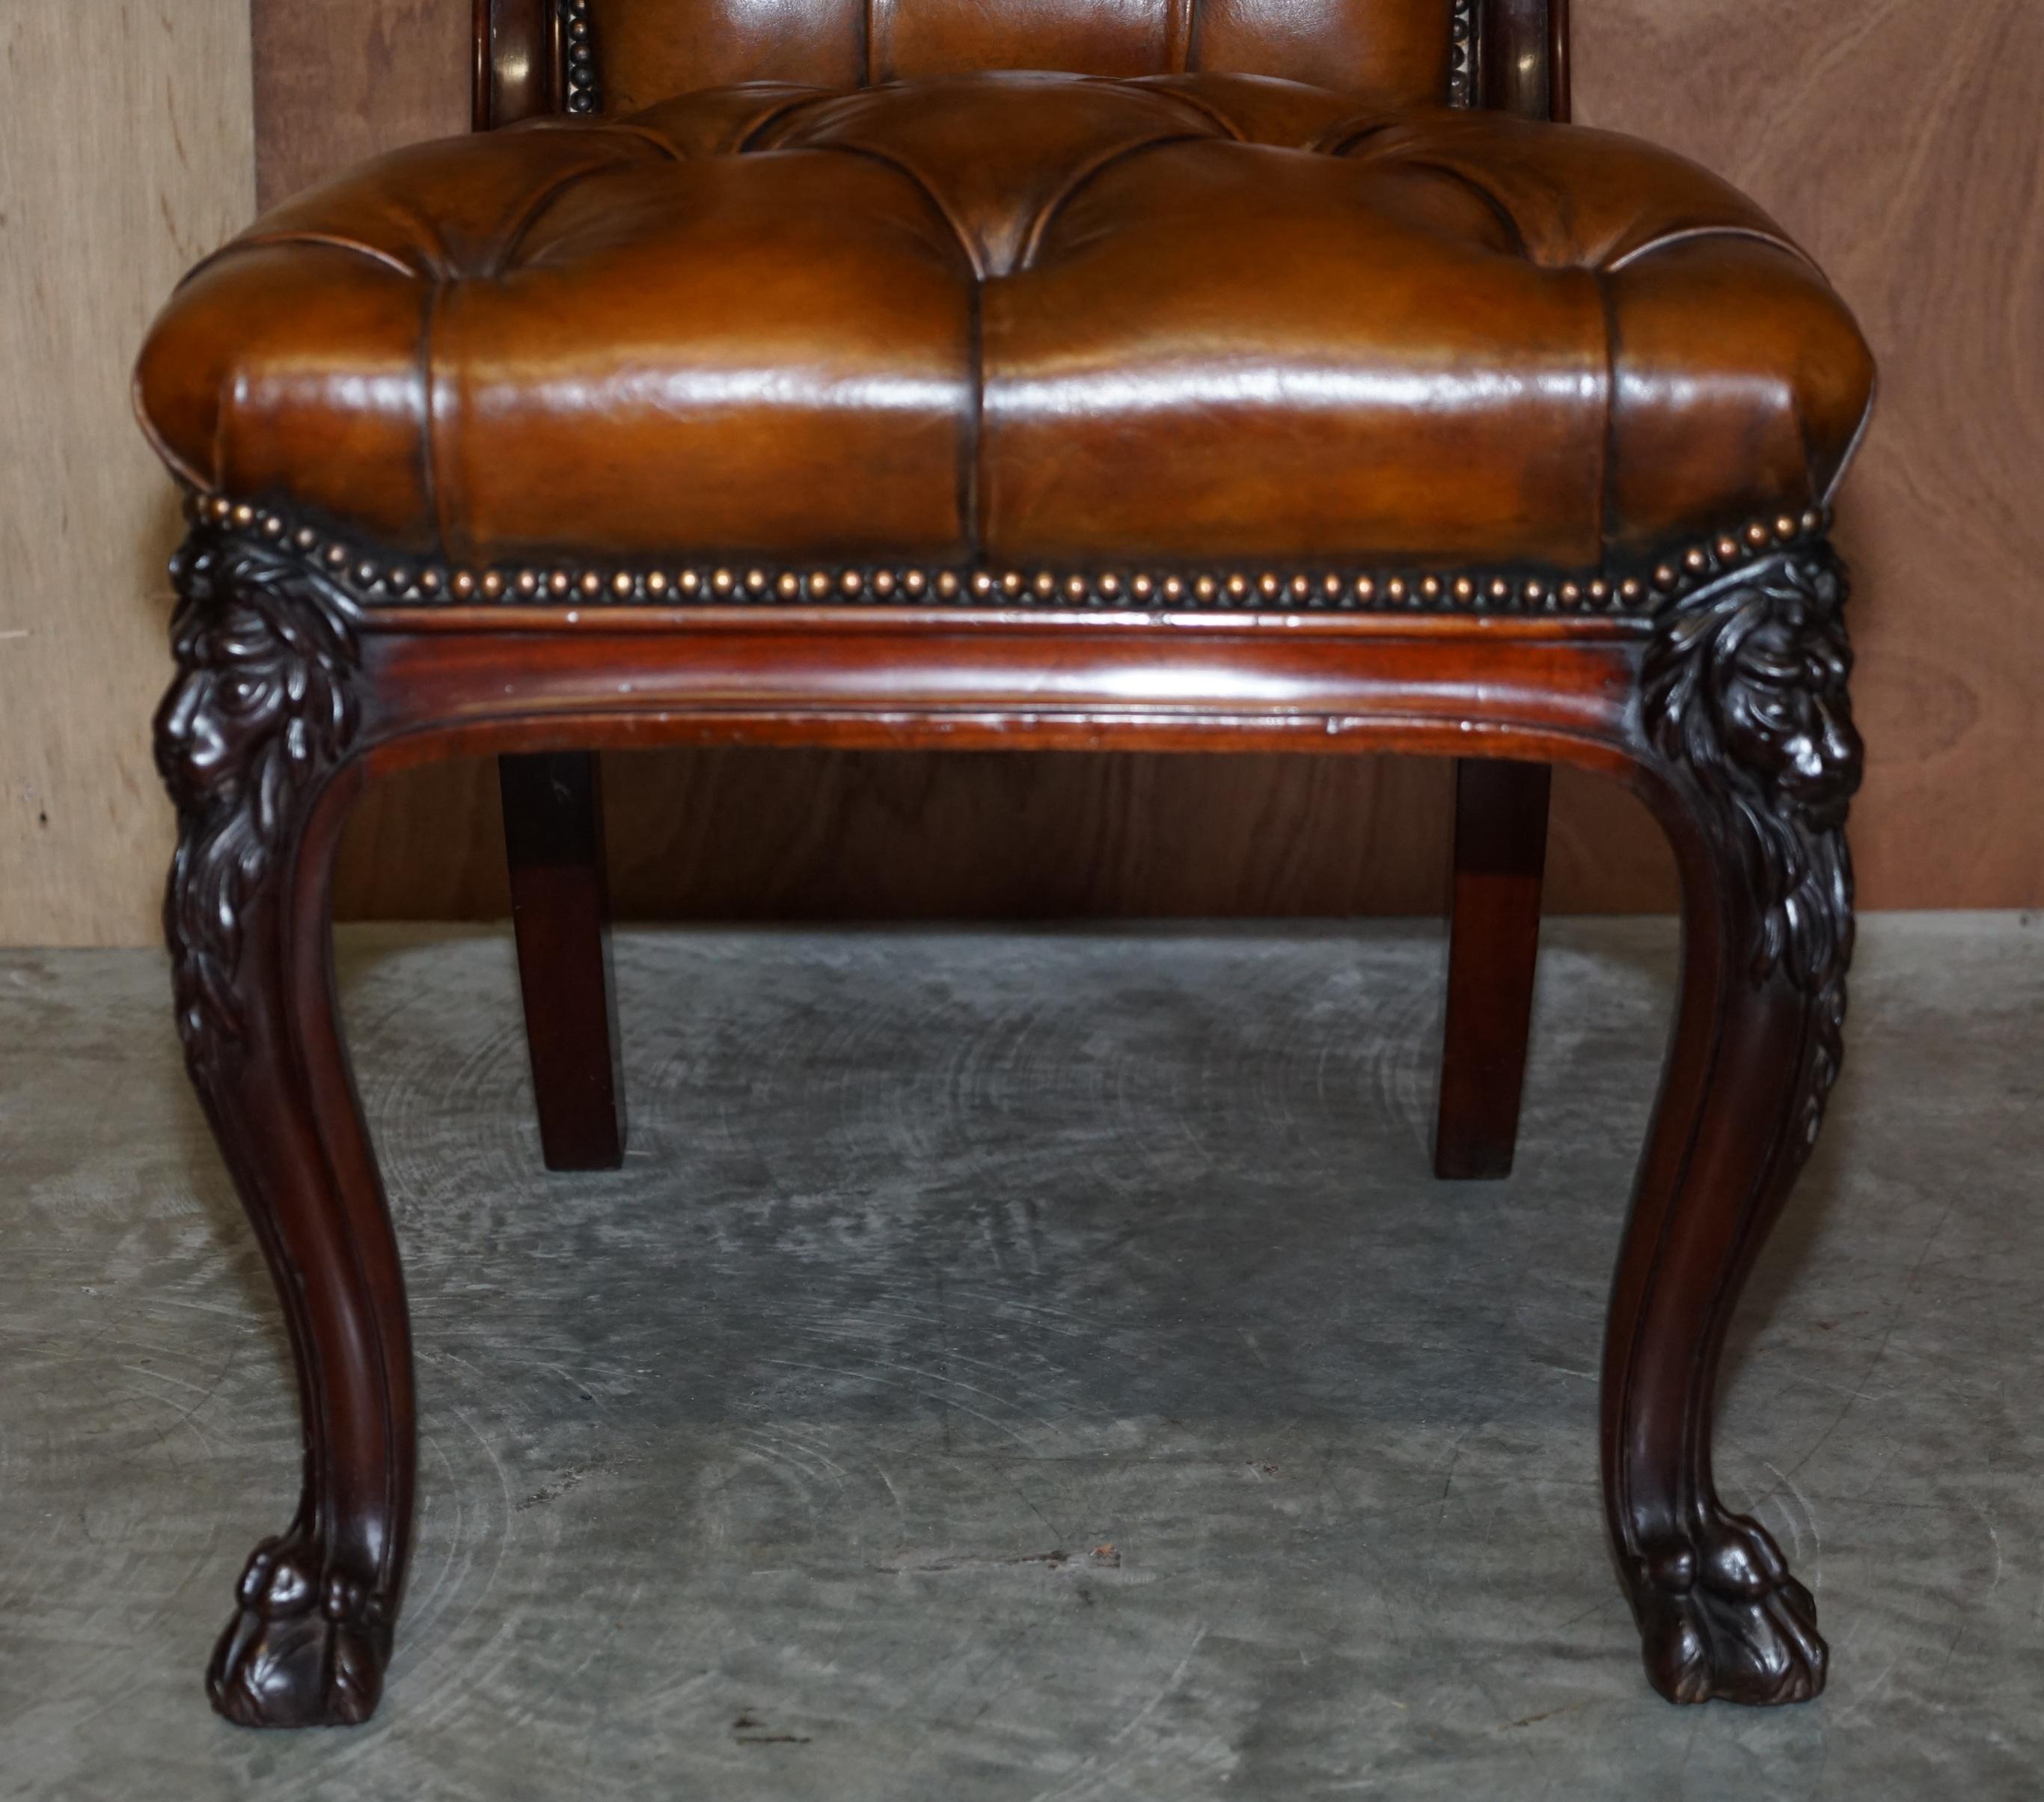 circa 1845 C Hindley & Sons Lion Carved Chesterfield Brown Leather Dining Chairs For Sale 7